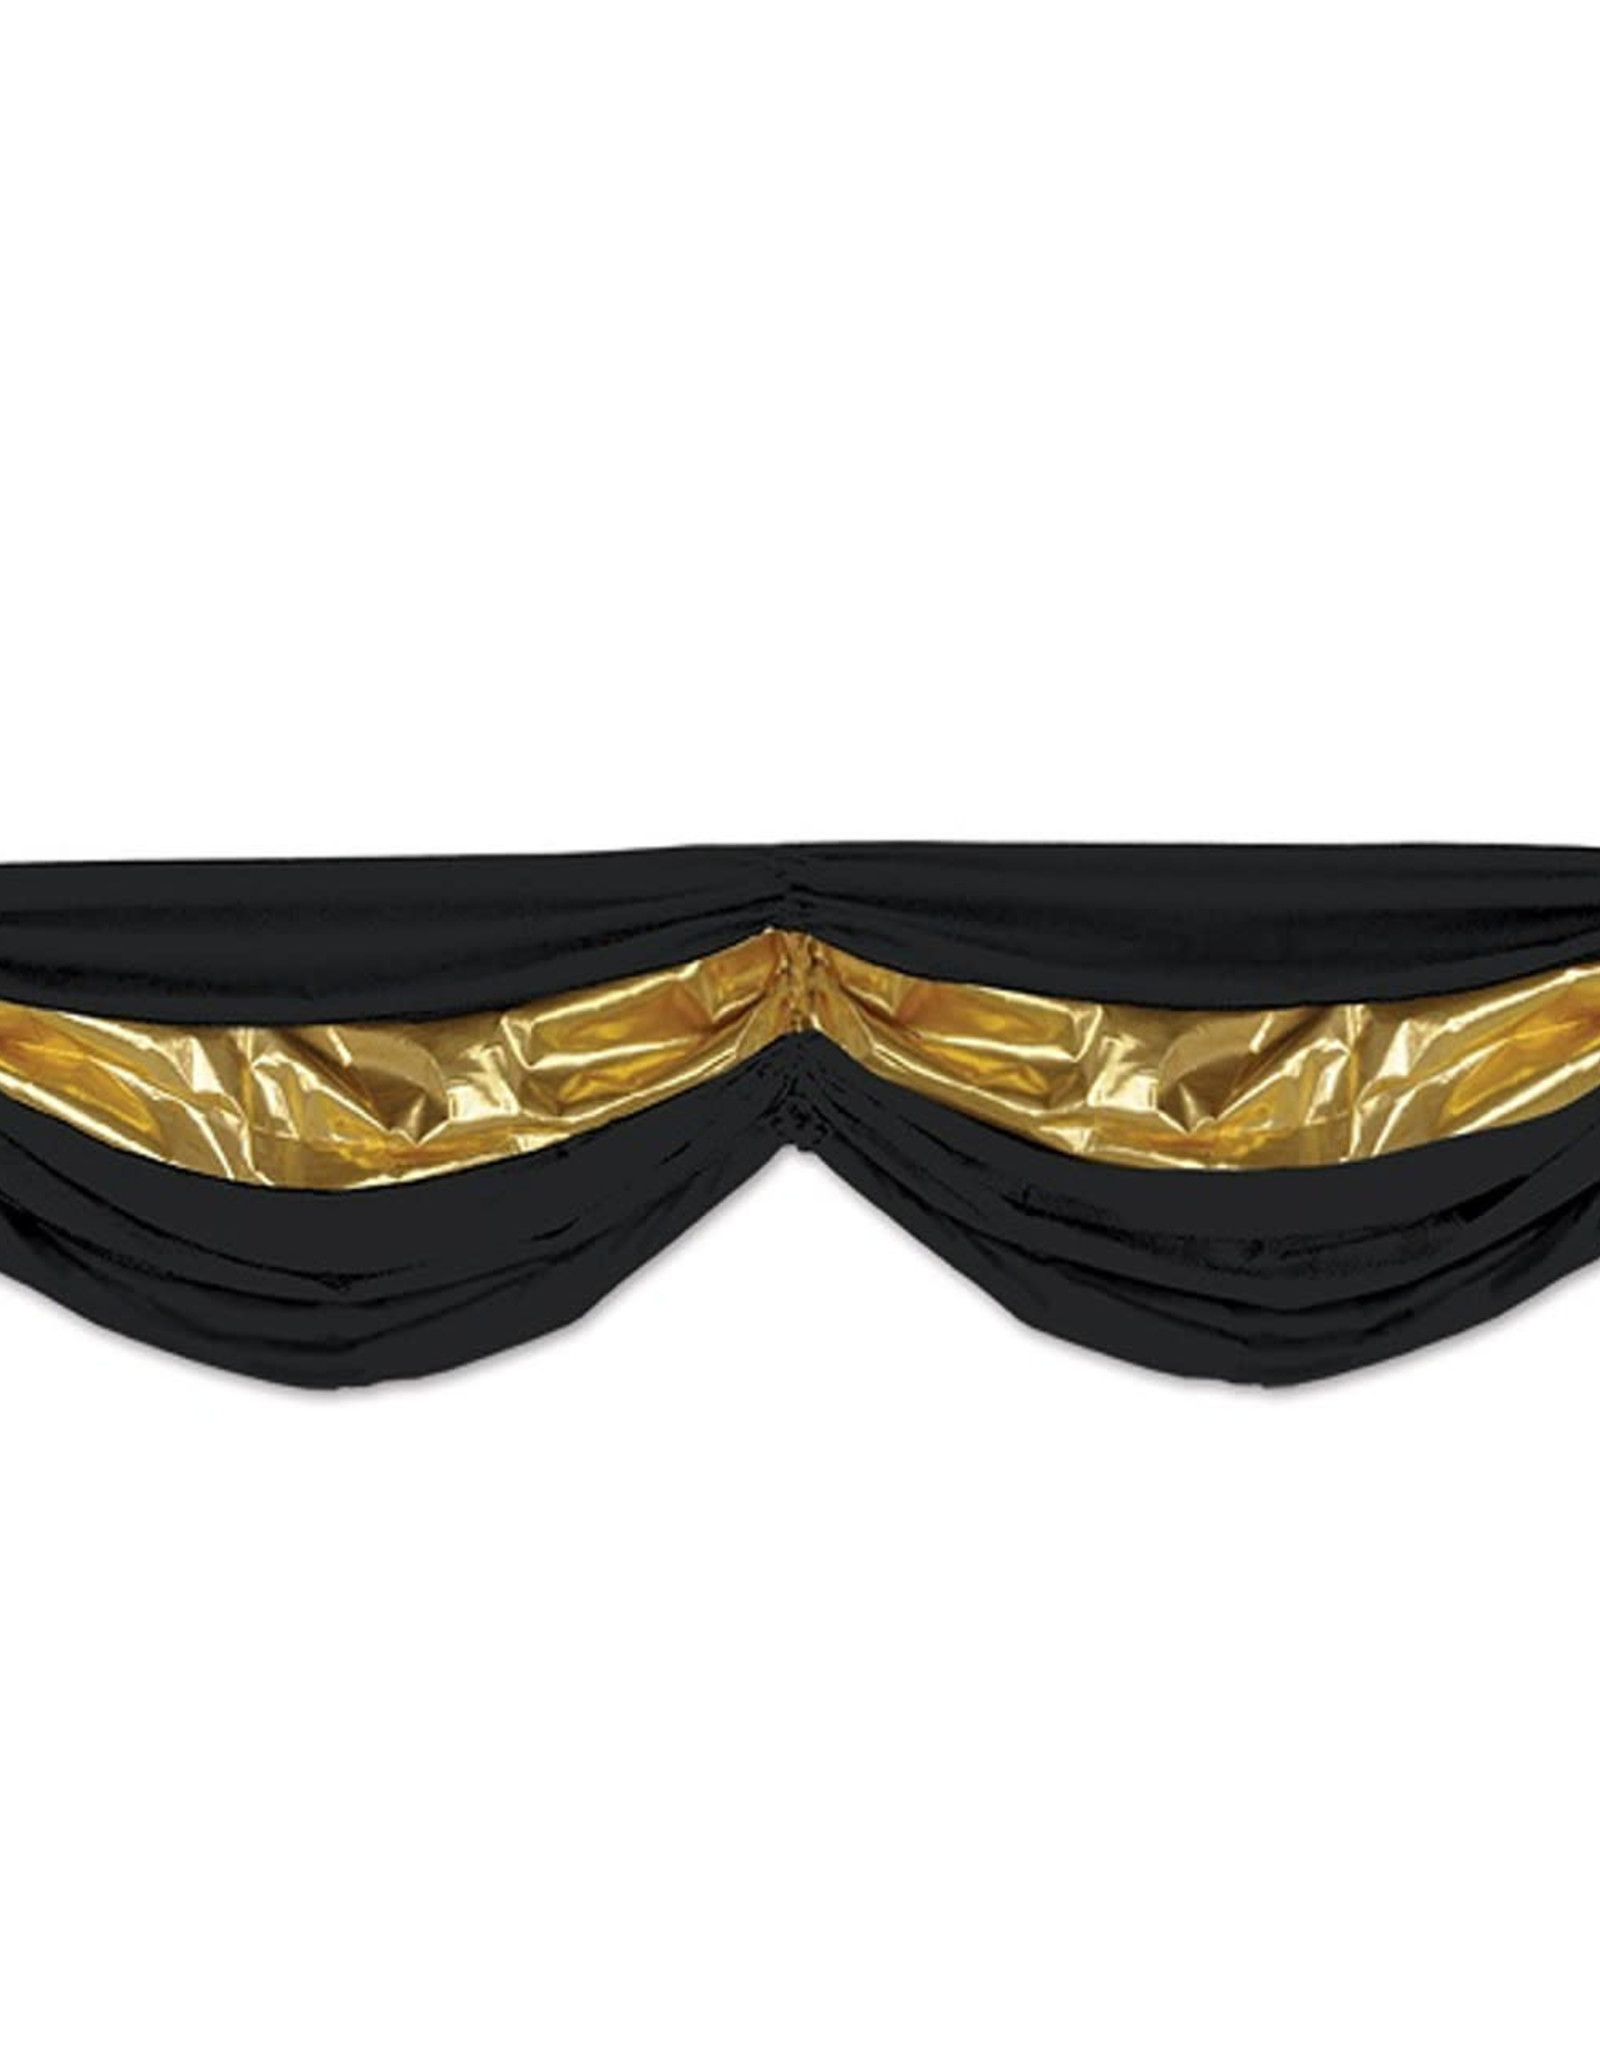 Wallys party factory Black and Gold Fabric Bunting